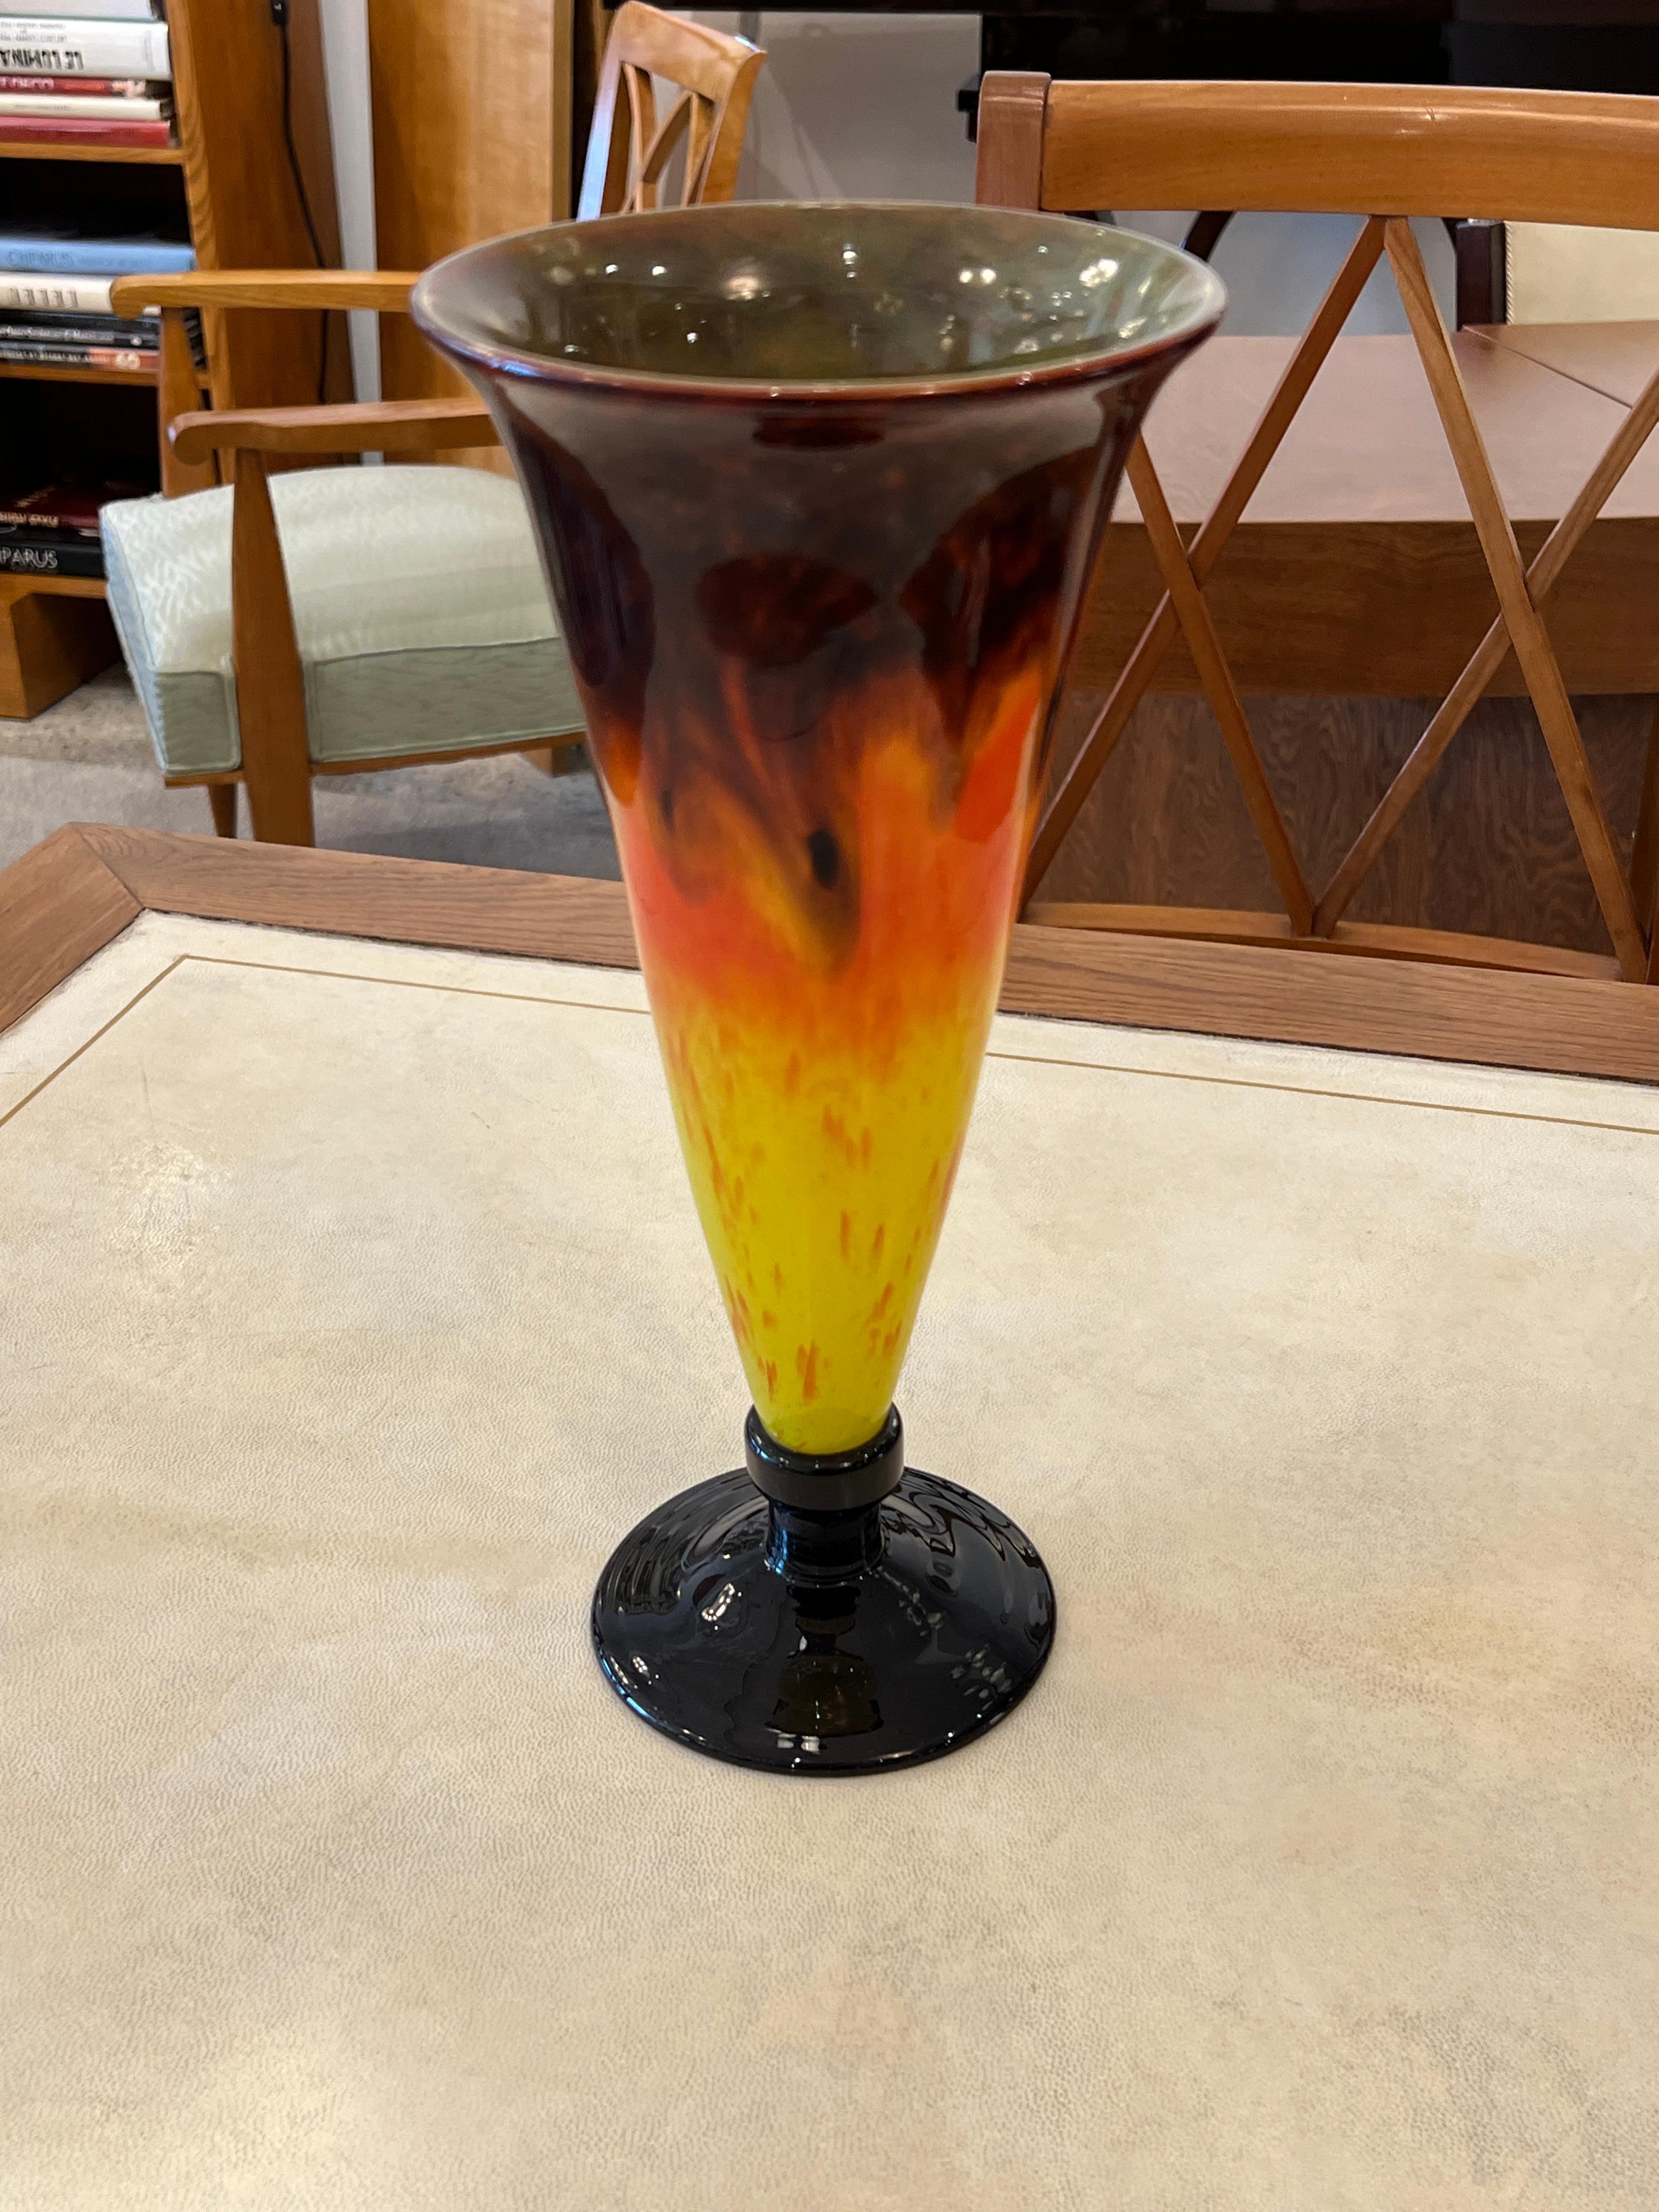 Art Deco vase by Charles Schneider in yellow orange and brown colors.

Signature: 